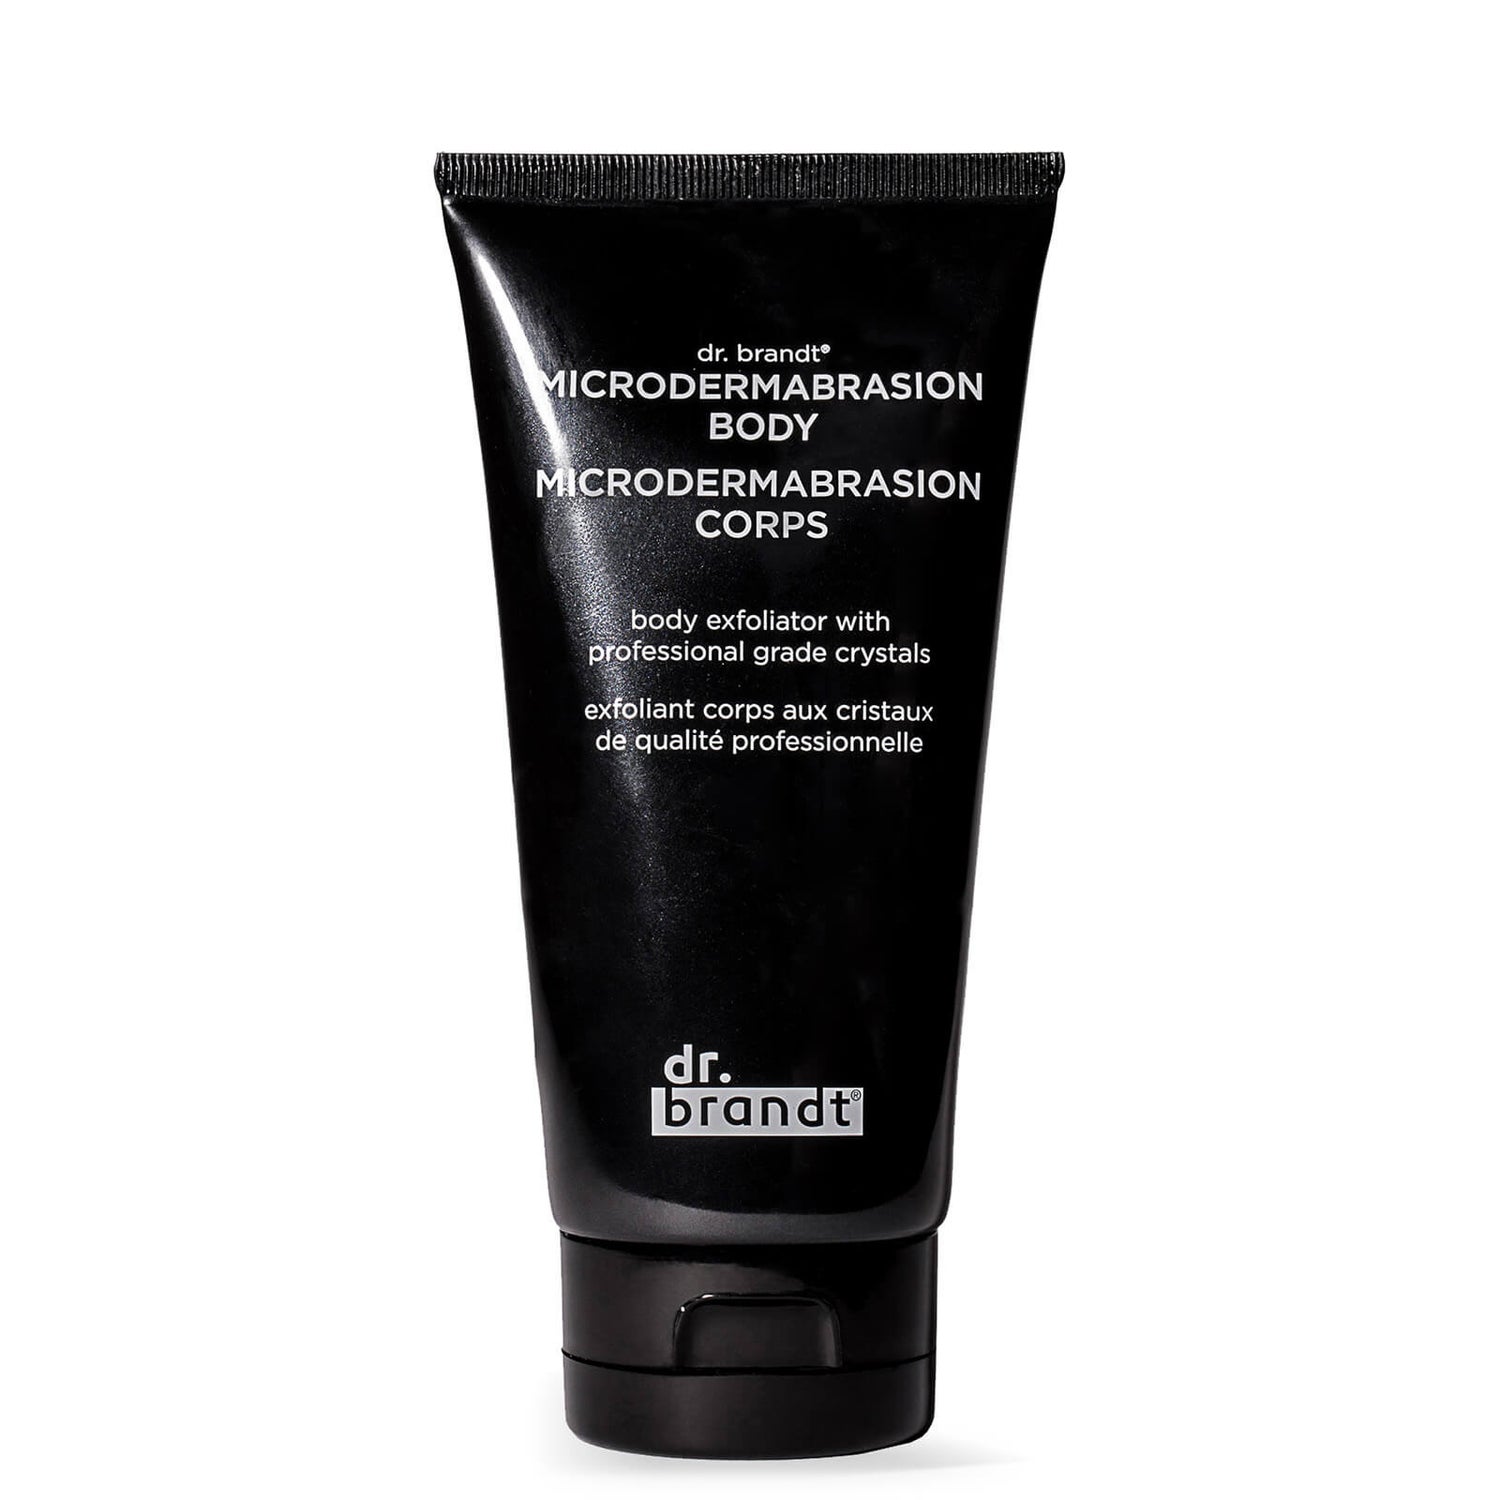 Dr. Brandt Microdermabrasion Body Body Exfoliator With Professional Grade Crystals 150g.